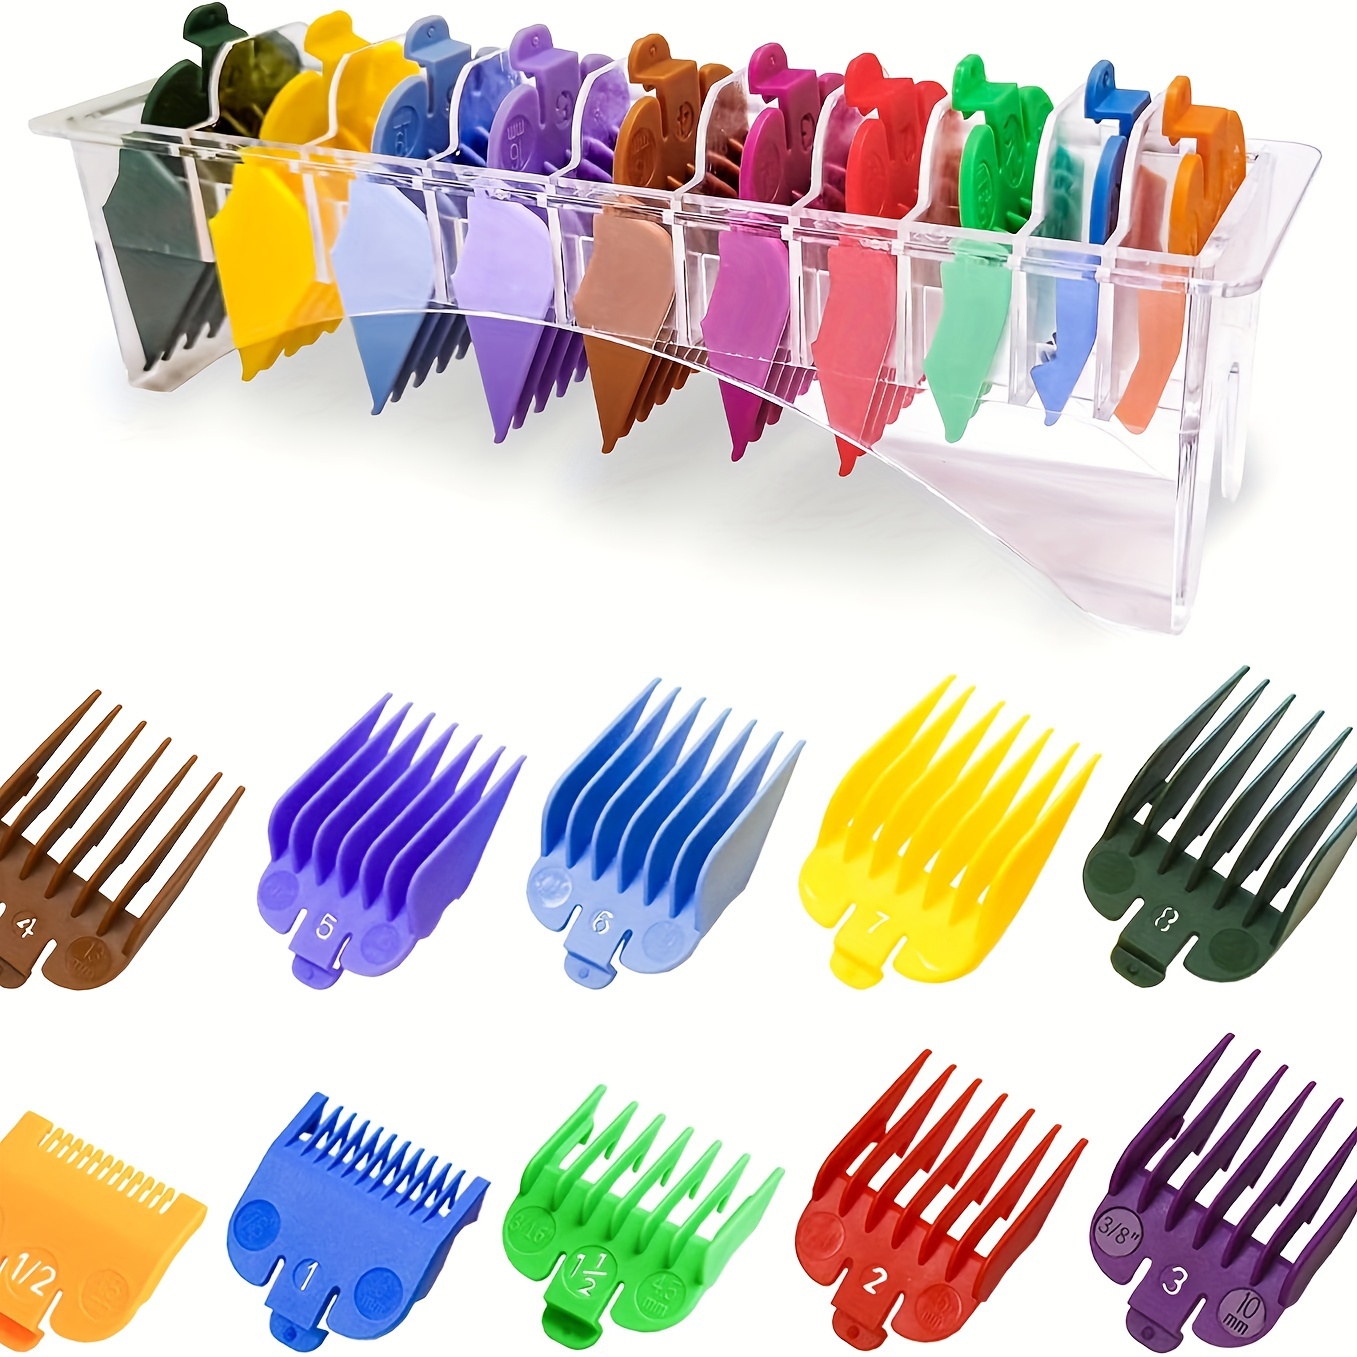 

8pcs/10pcs Universal Hair Clipper Limit Combs Guide Attachment Accessories, Professional Hair Clipper Guide Combs